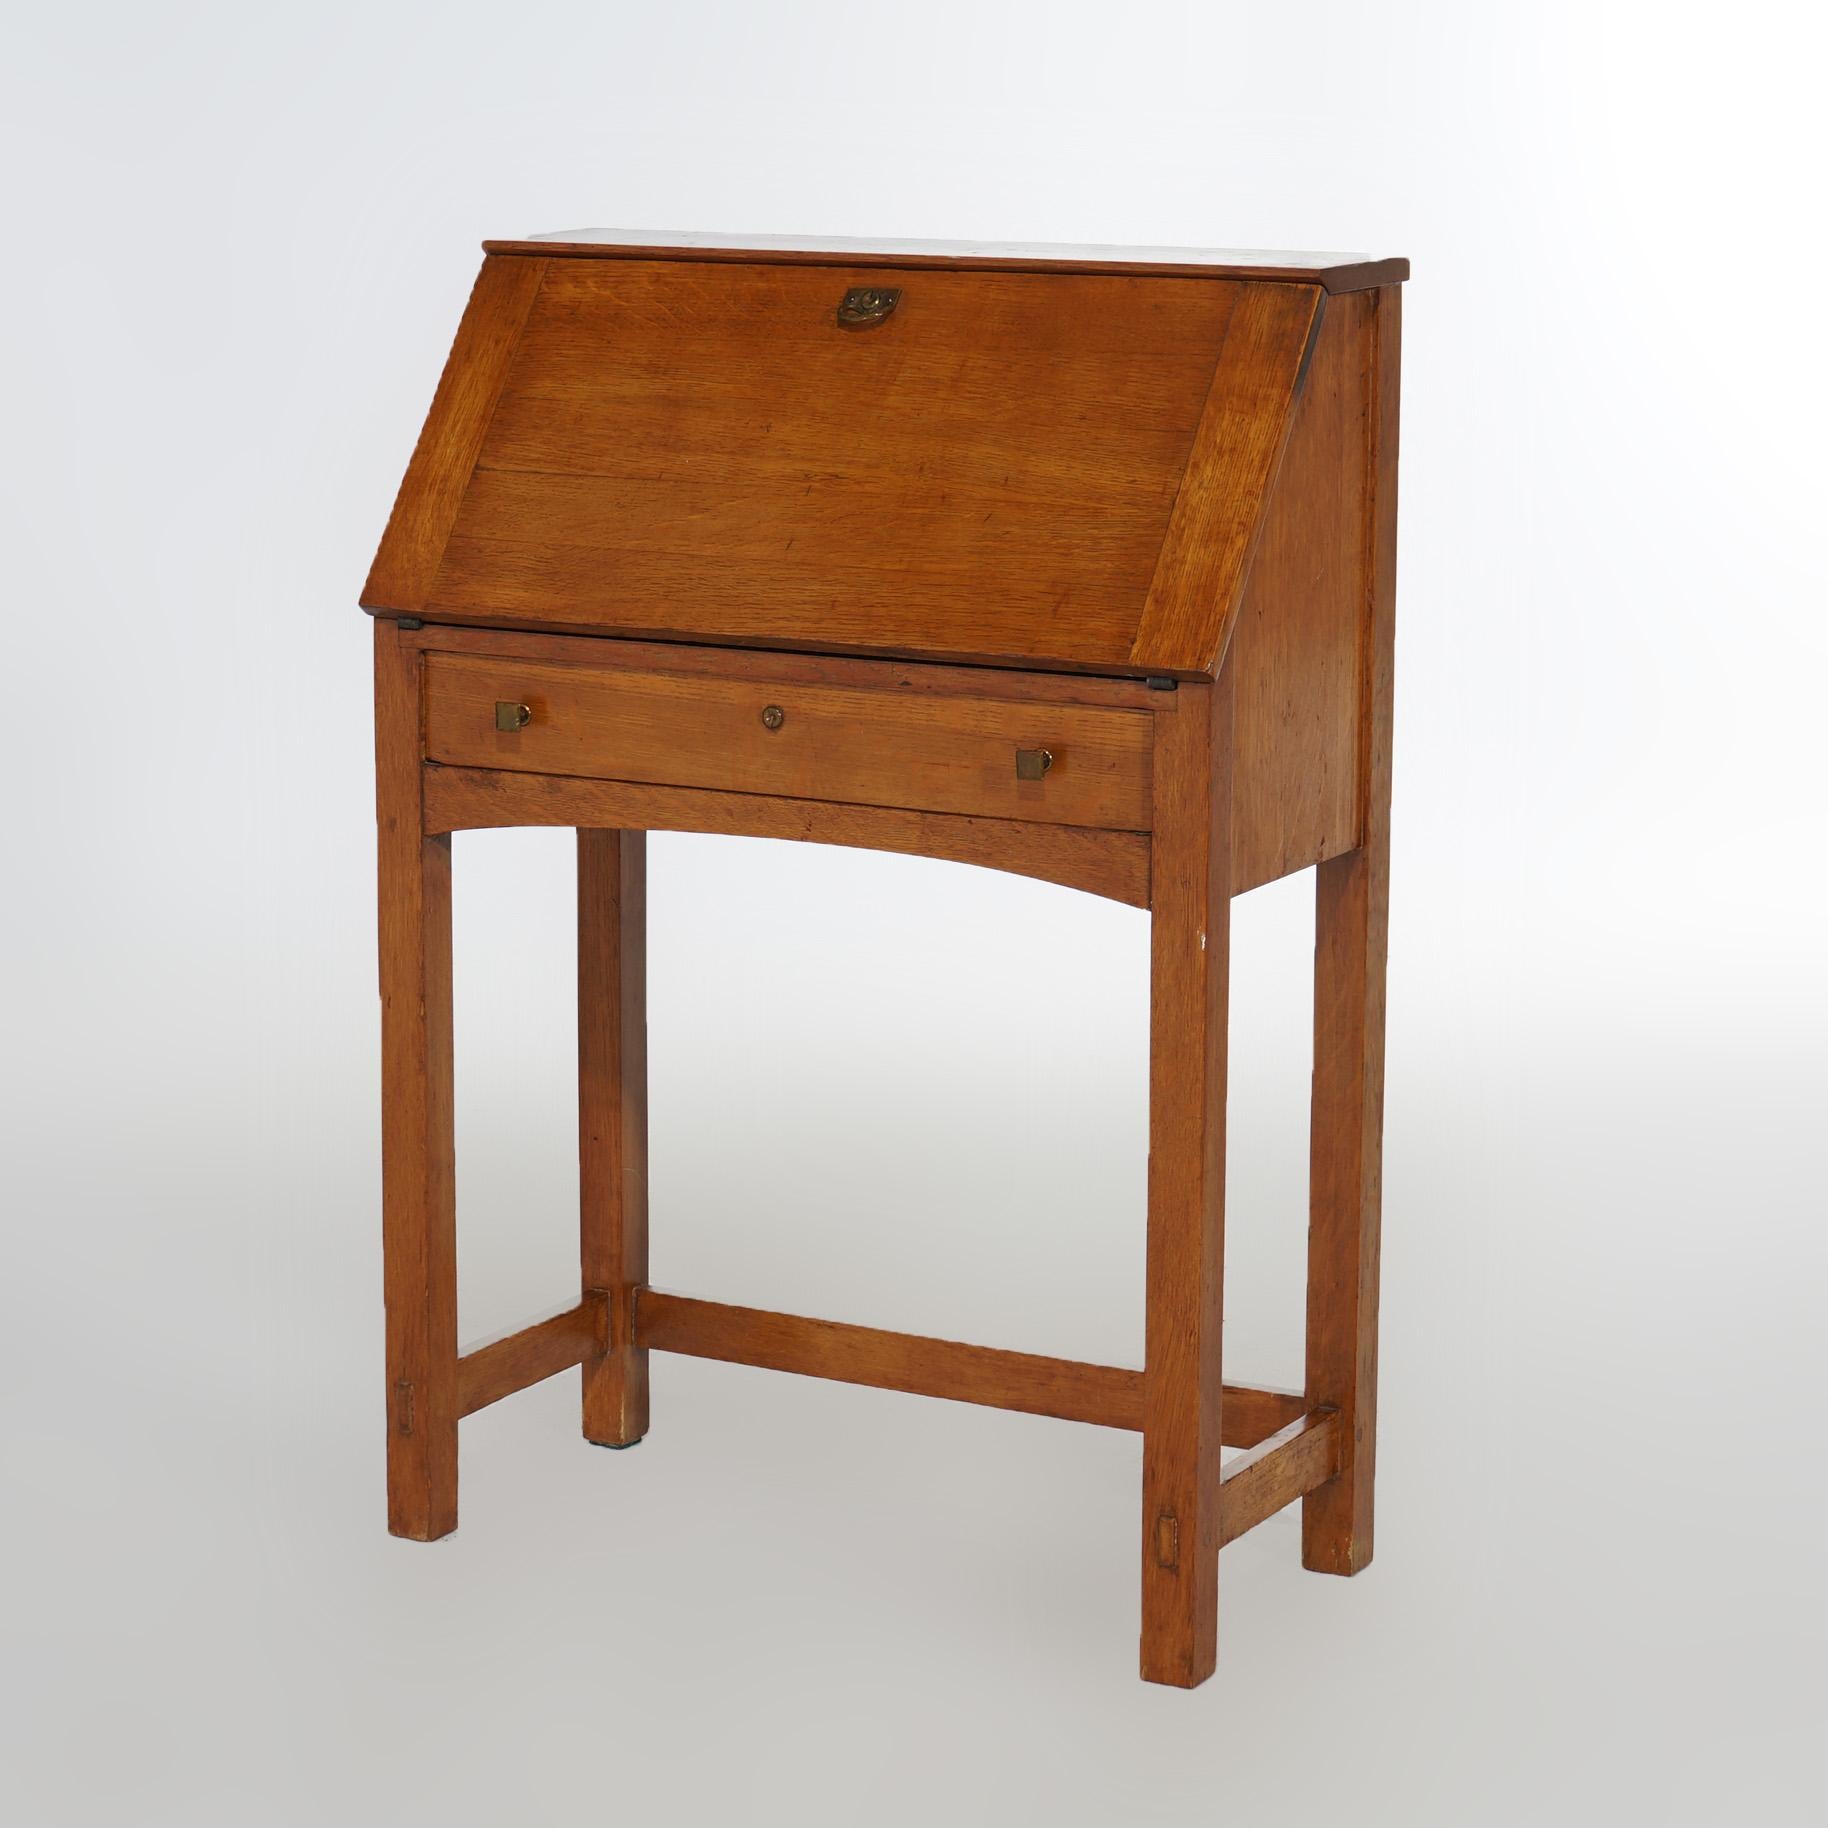 An antique Limbert Arts and Crafts desk offers oak construction with drop front opening to interior with pigeon holes and drawers, raised on straight and square legs, LImbert label as photographed, c1910

Measures - 39.5